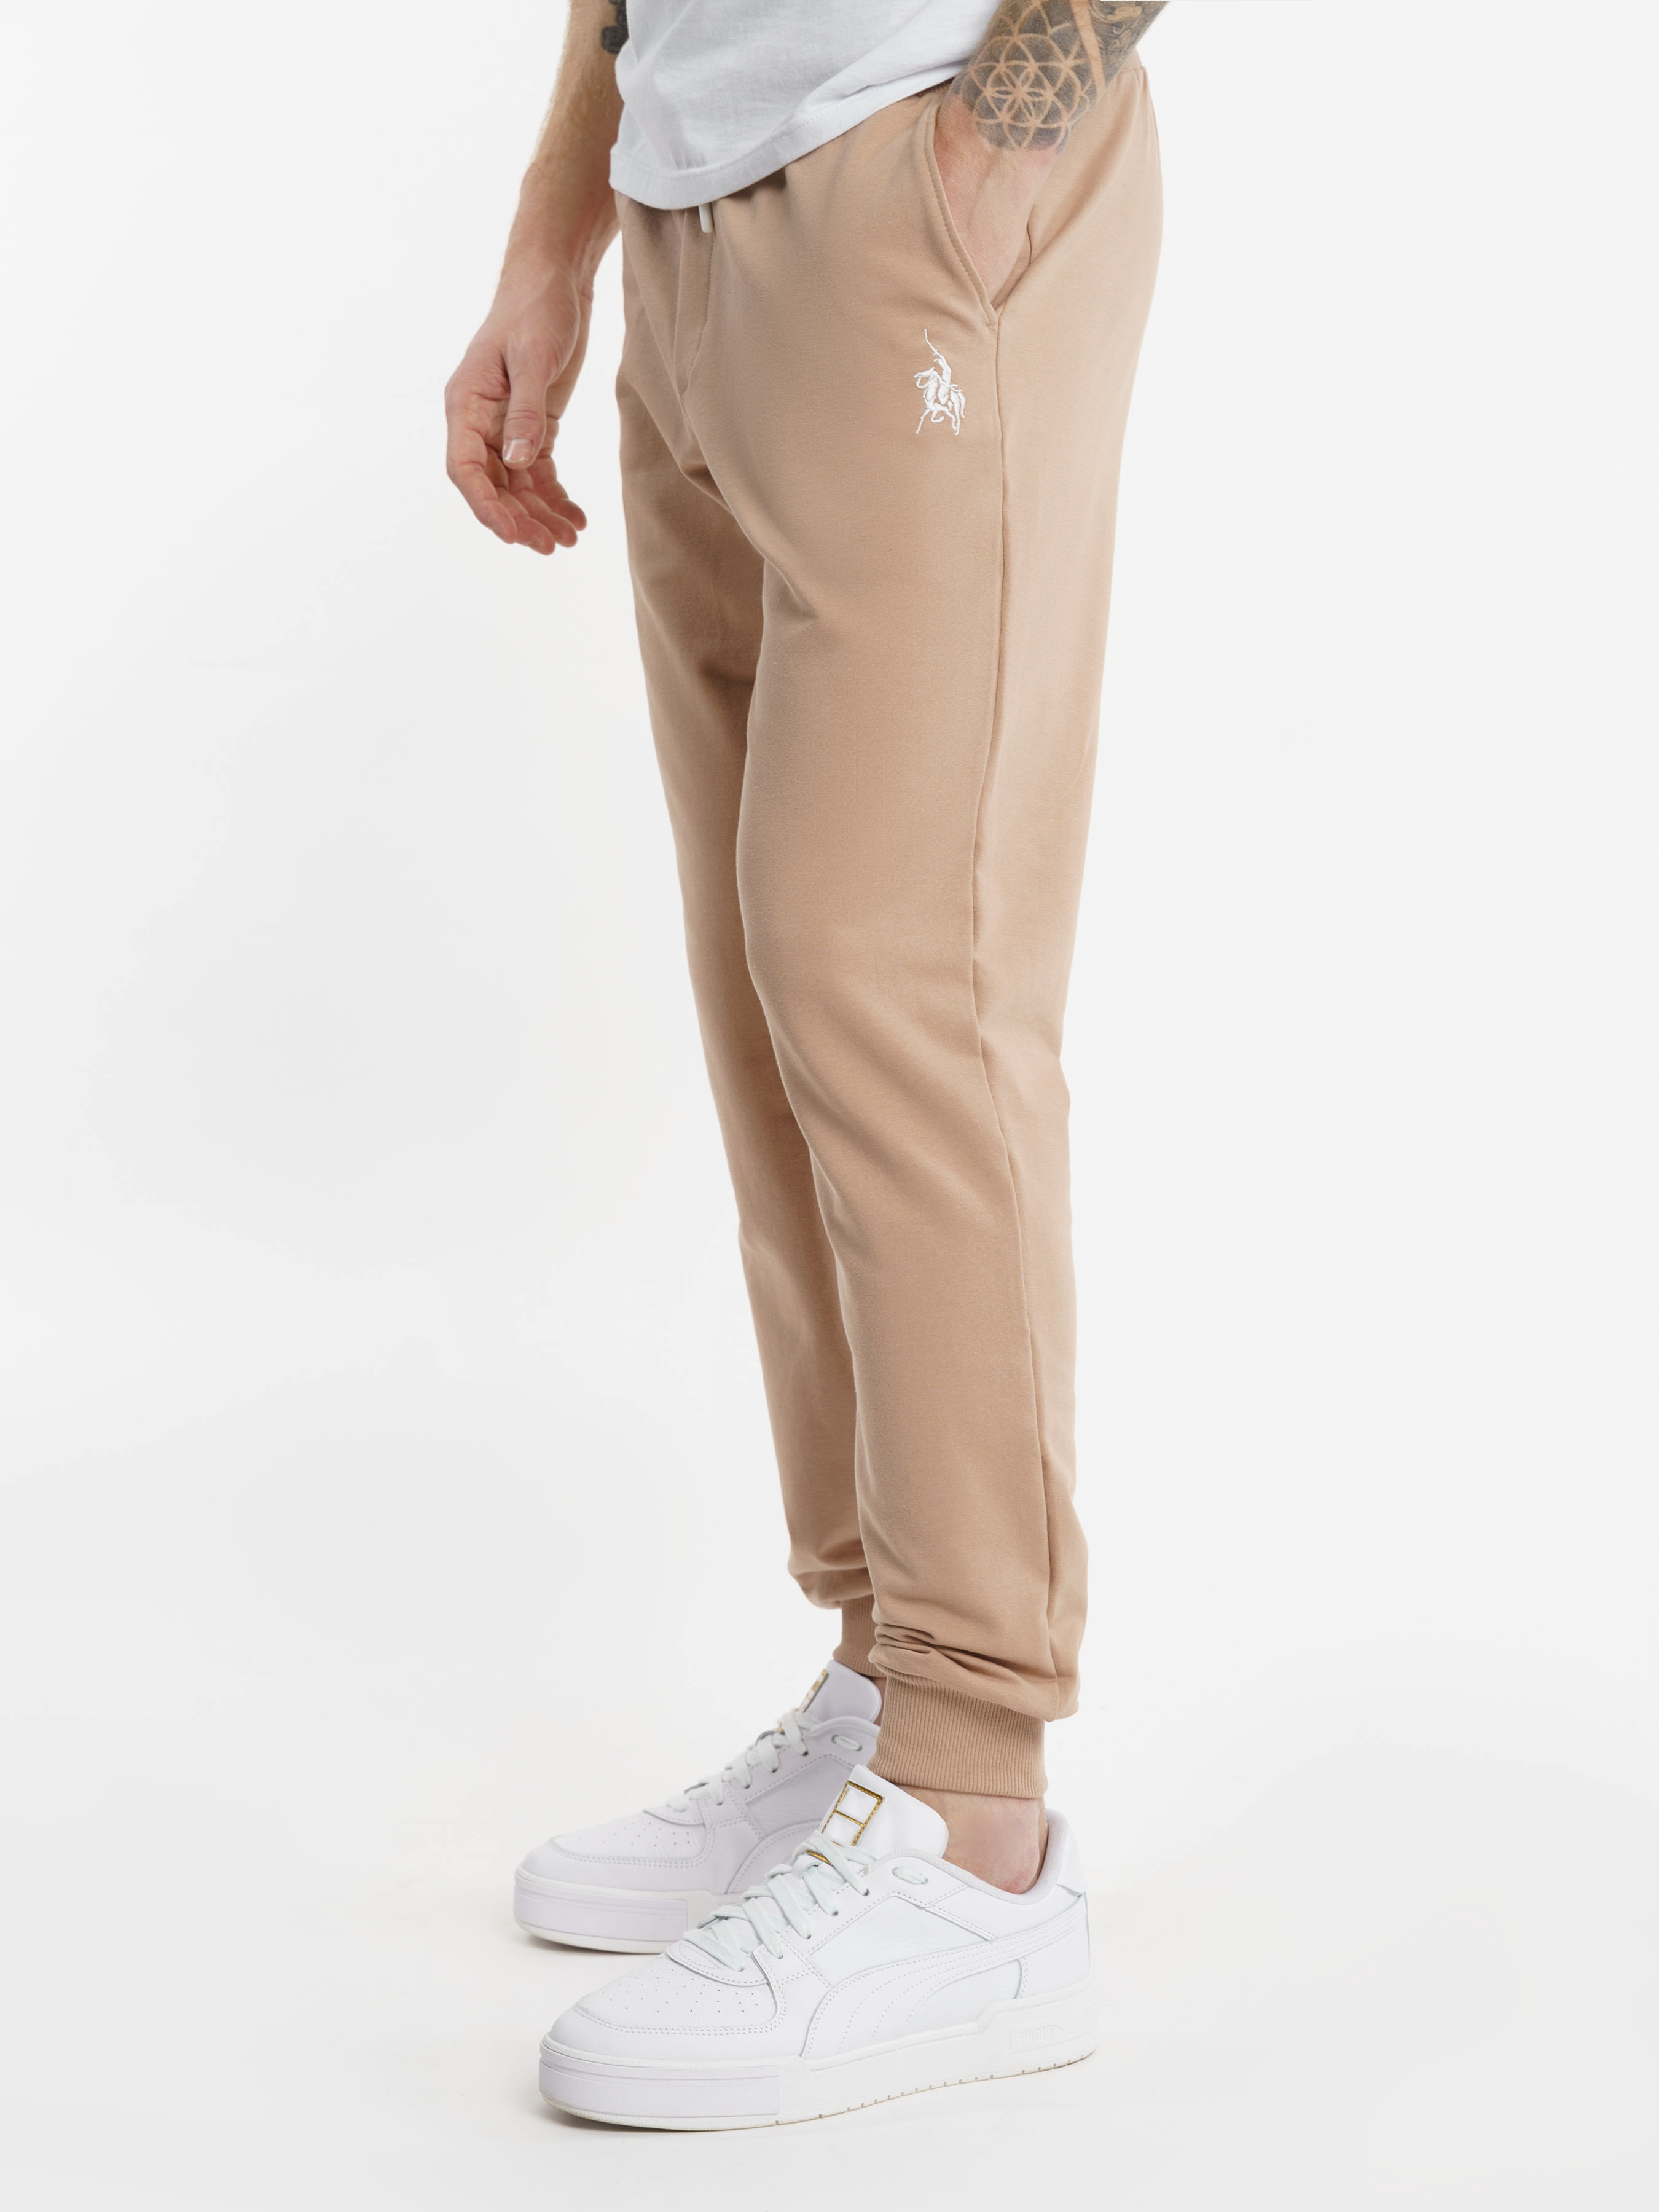 To men :: Men's clothing :: Sportswear :: Sports trousers :: Arber beige sports  pants made of knitted cotton